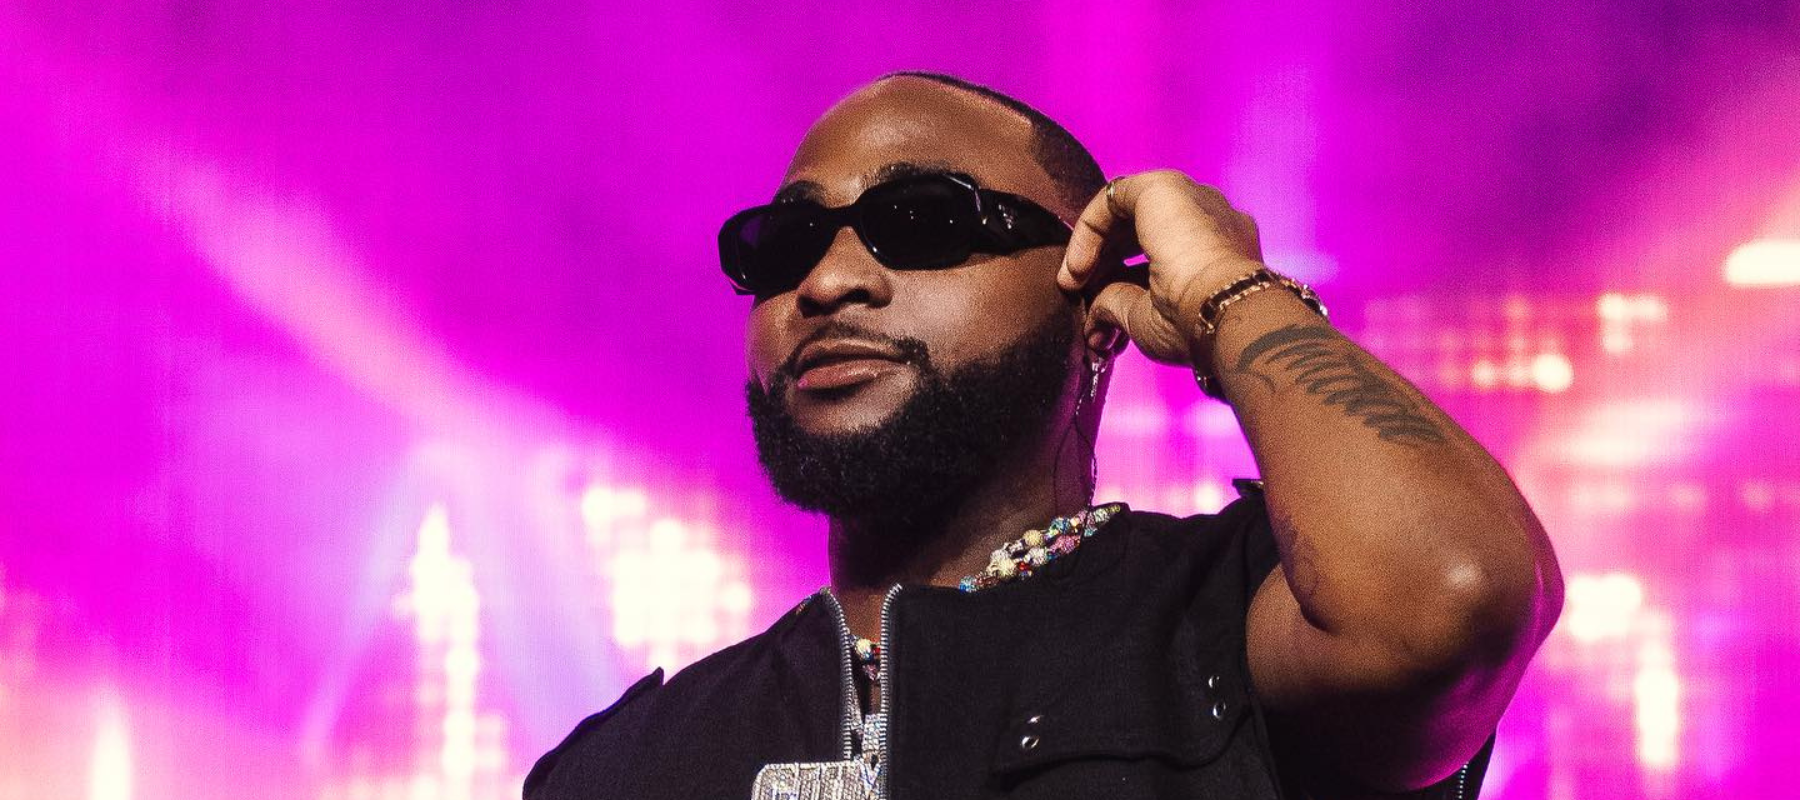 Davido’s Performance at Madison Square Garden Lived Up to its Hype